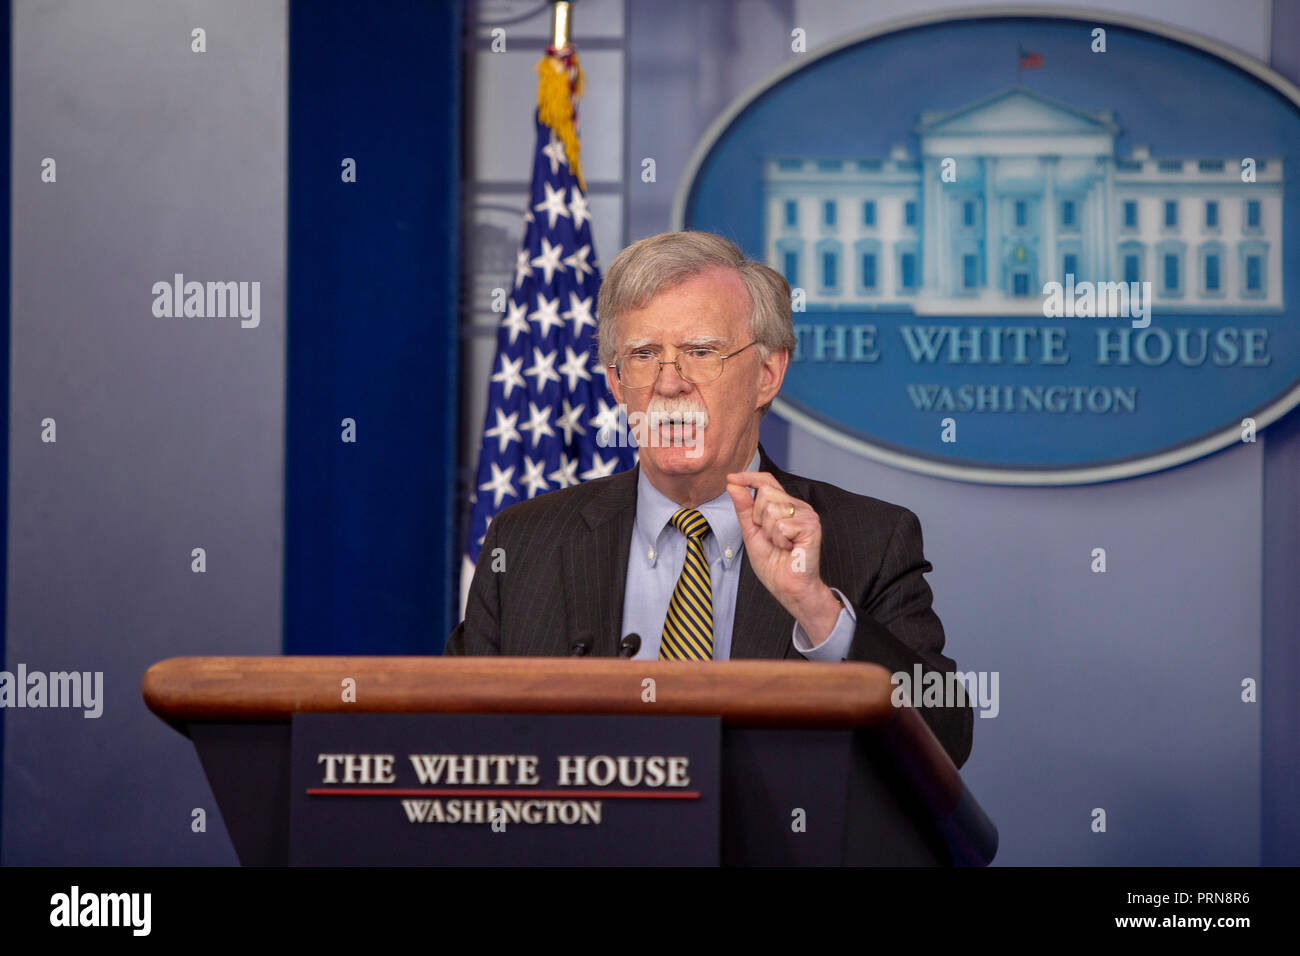 Washington DC, USA. 3rd Oct 2018. John Bolton, National Security Advisor of the United States speaks during a briefing at the White House on October 3, 2018. Credit: Tasos Katopodis/CNP /MediaPunch Credit: MediaPunch Inc/Alamy Live News Stock Photo